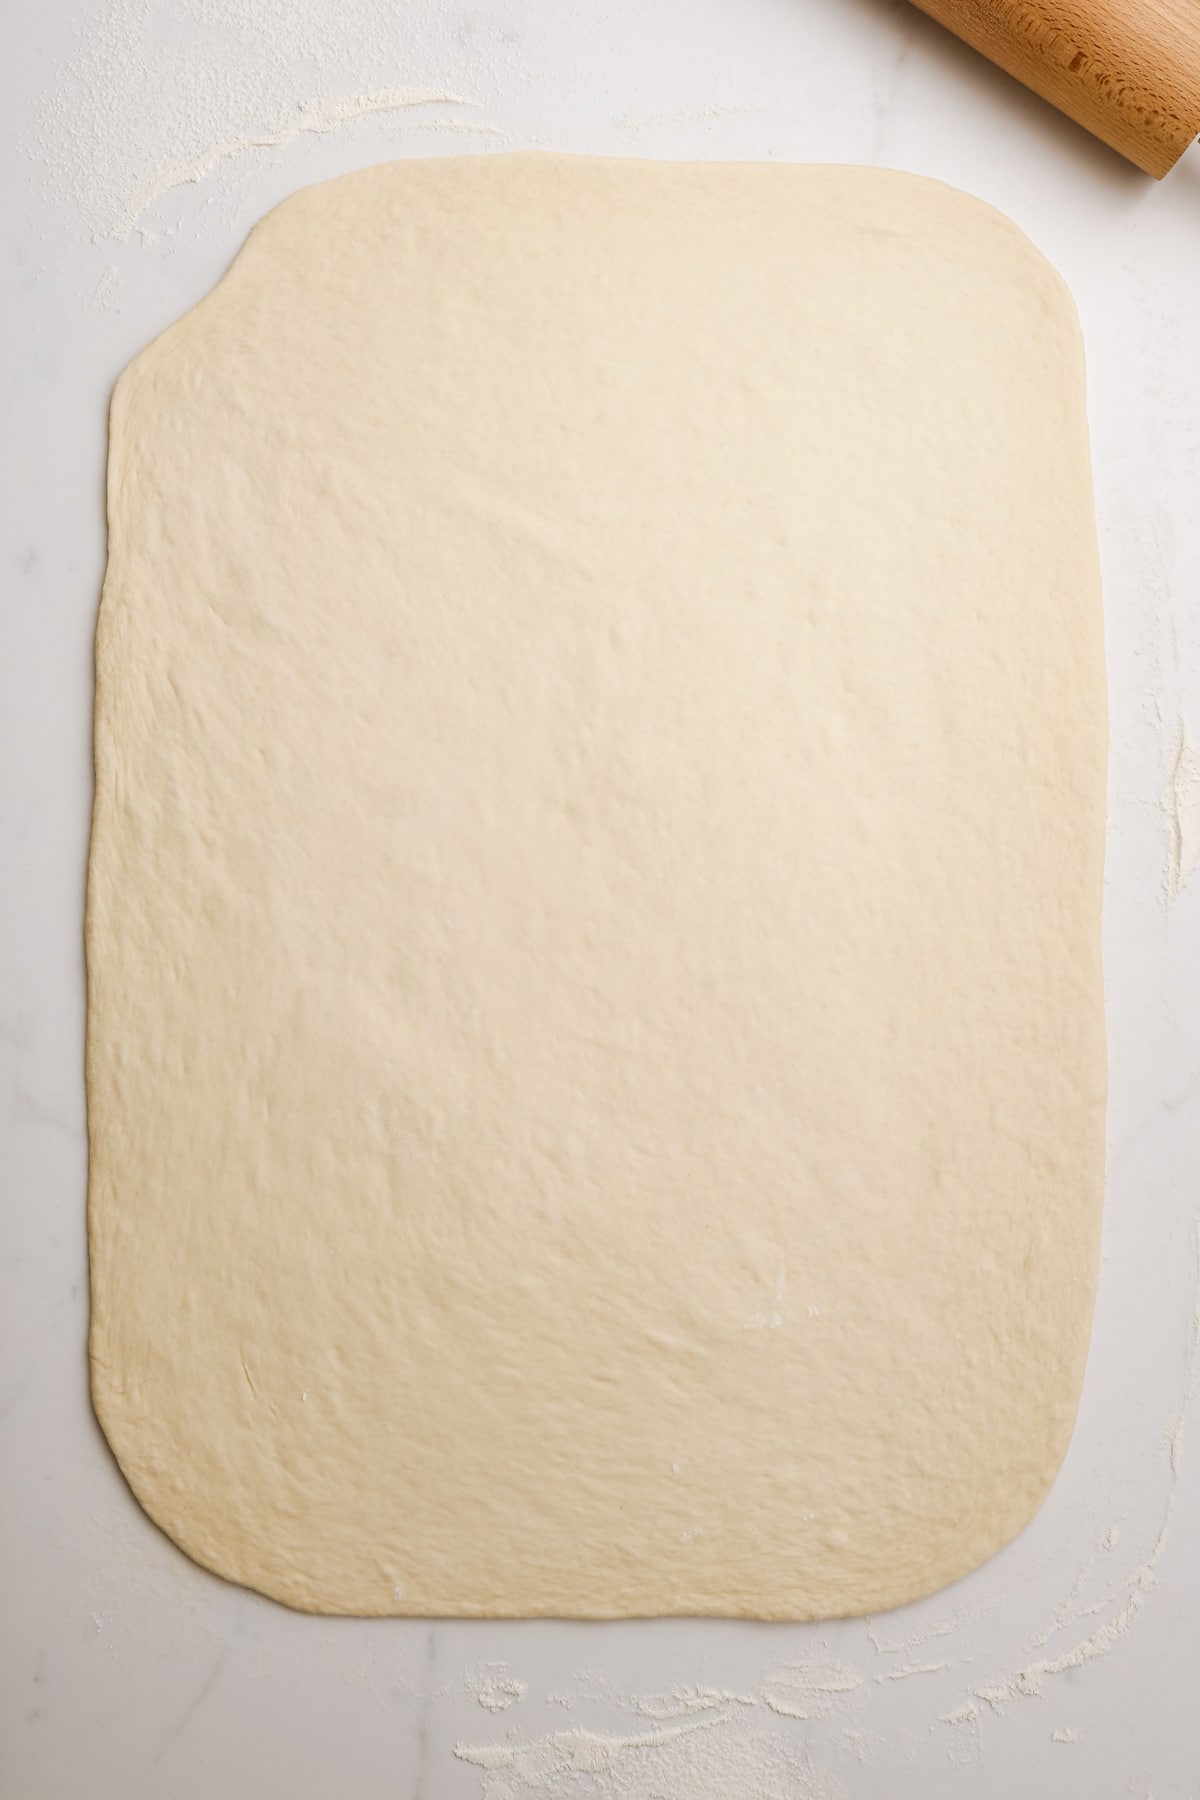 dough rolled into a rectangle.